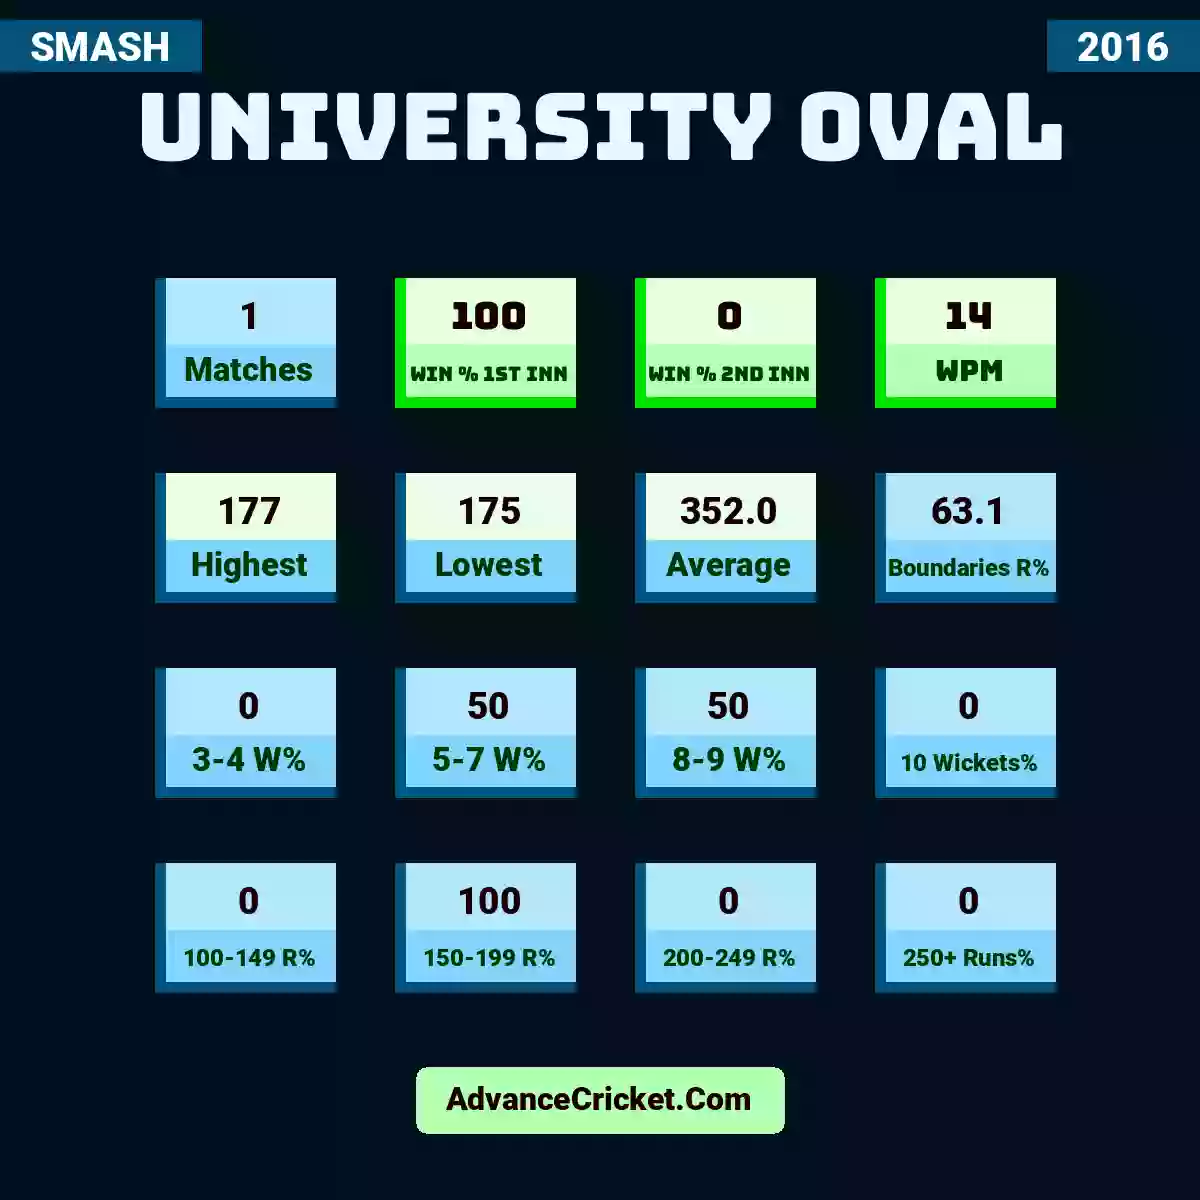 Image showing University Oval with Matches: 1, Win % 1st Inn: 100, Win % 2nd Inn: 0, WPM: 14, Highest: 177, Lowest: 175, Average: 352.0, Boundaries R%: 63.1, 3-4 W%: 0, 5-7 W%: 50, 8-9 W%: 50, 10 Wickets%: 0, 100-149 R%: 0, 150-199 R%: 100, 200-249 R%: 0, 250+ Runs%: 0.